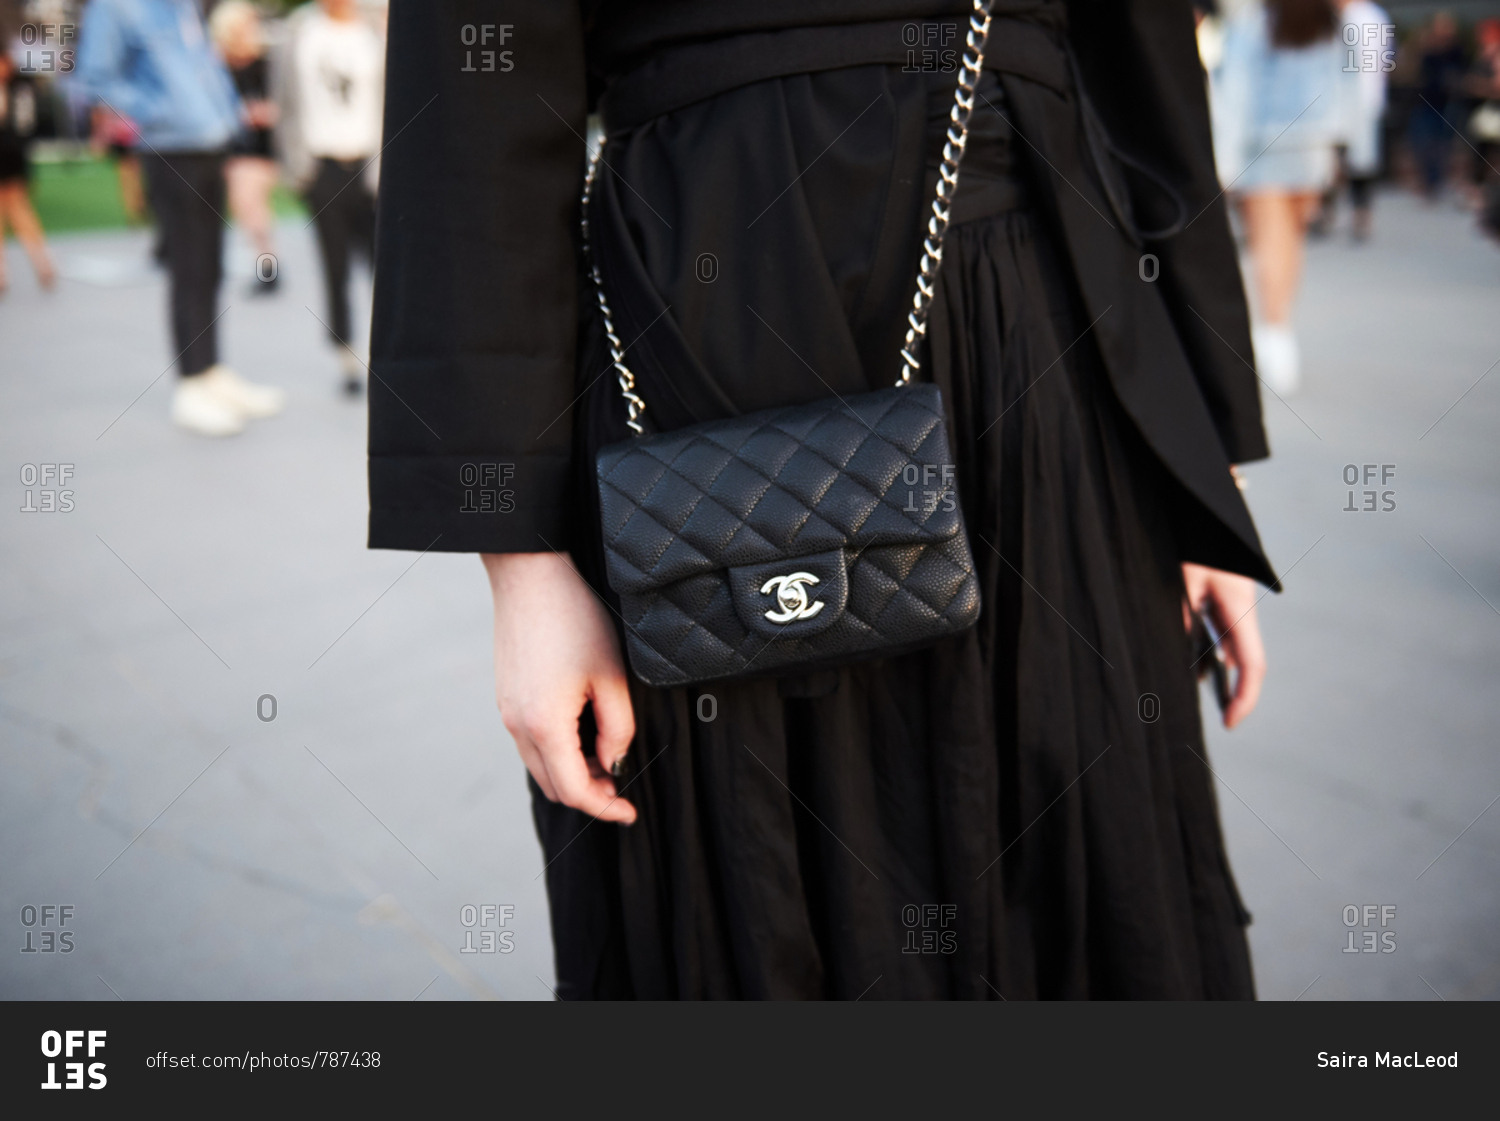 March 09, 2018- Melbourne, Australia: Fashion event guest wearing Chanel  crossbody bag in all black stock photo - OFFSET